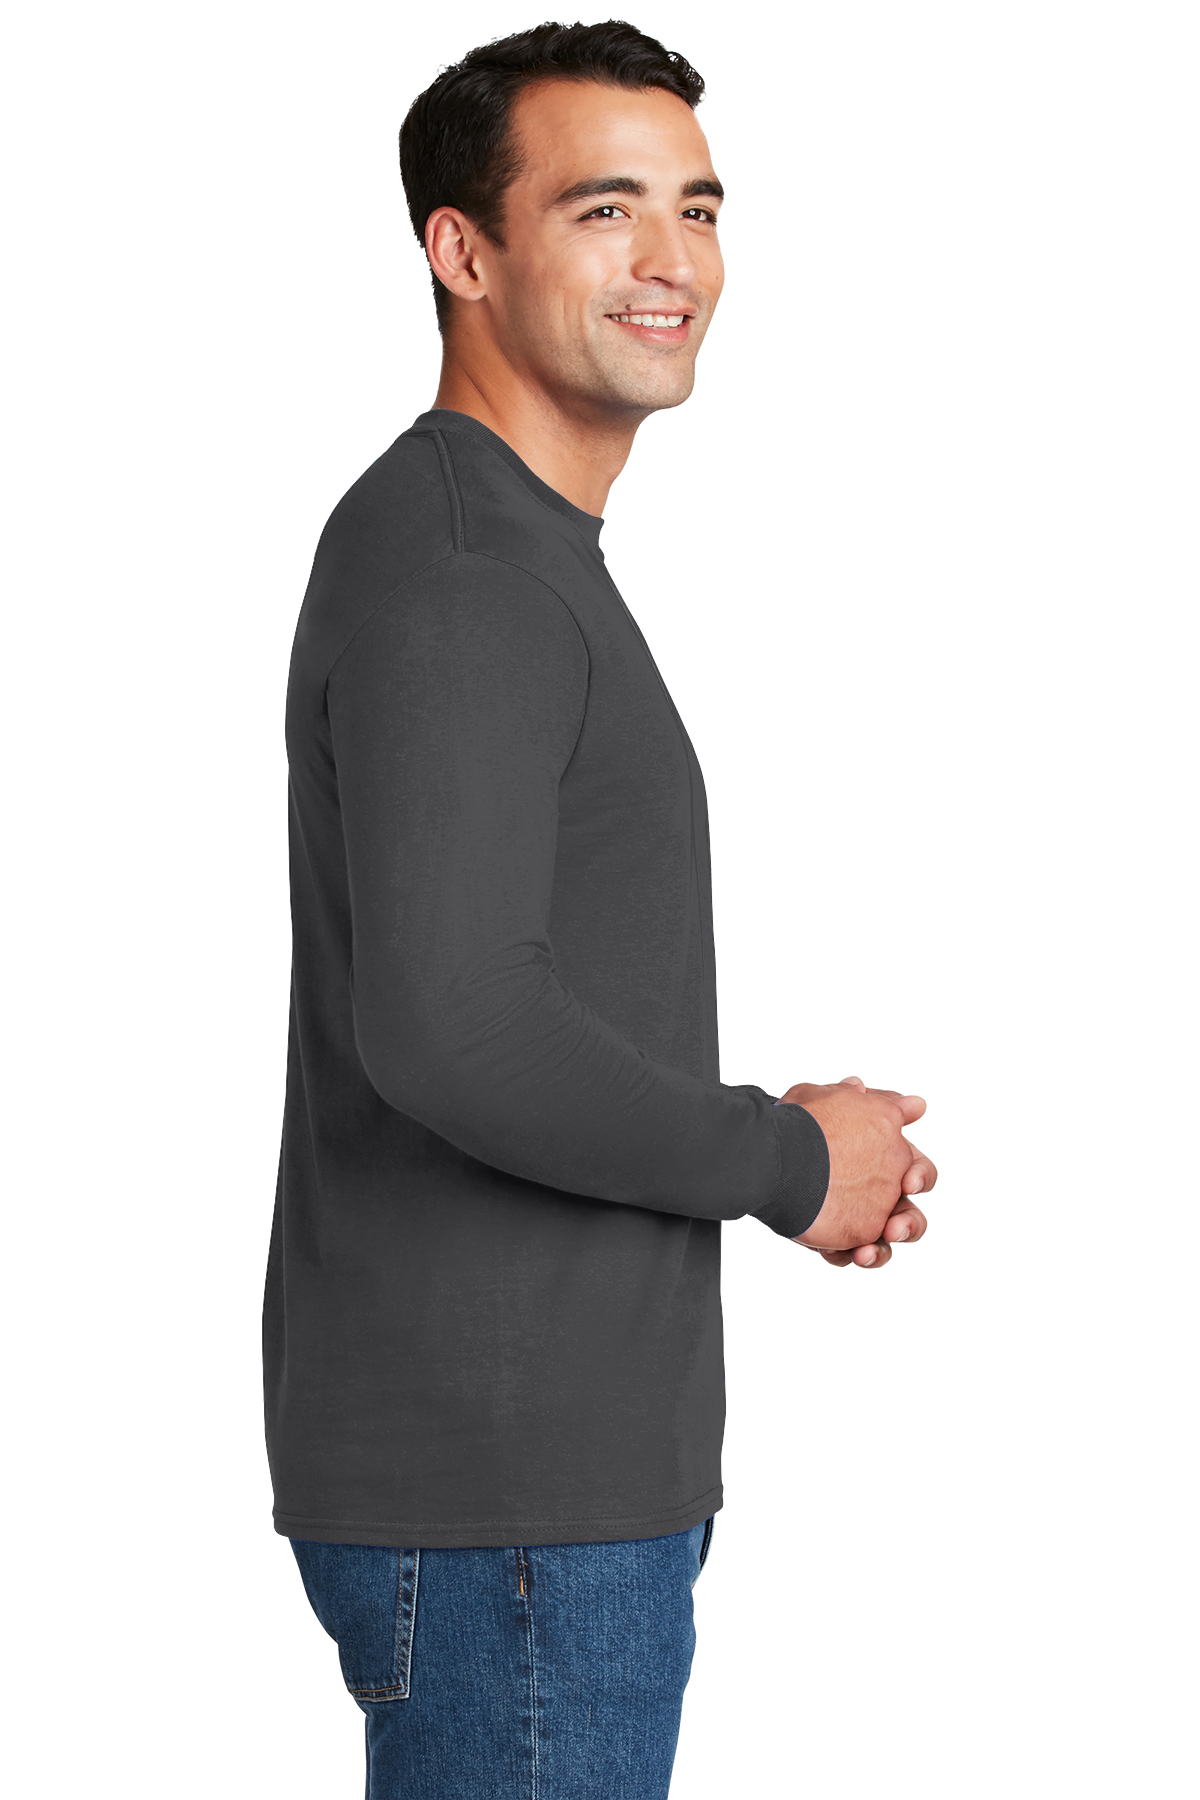 Hanes Beefy-T - 100% Cotton Long Sleeve T-Shirt | Product | Company Casuals